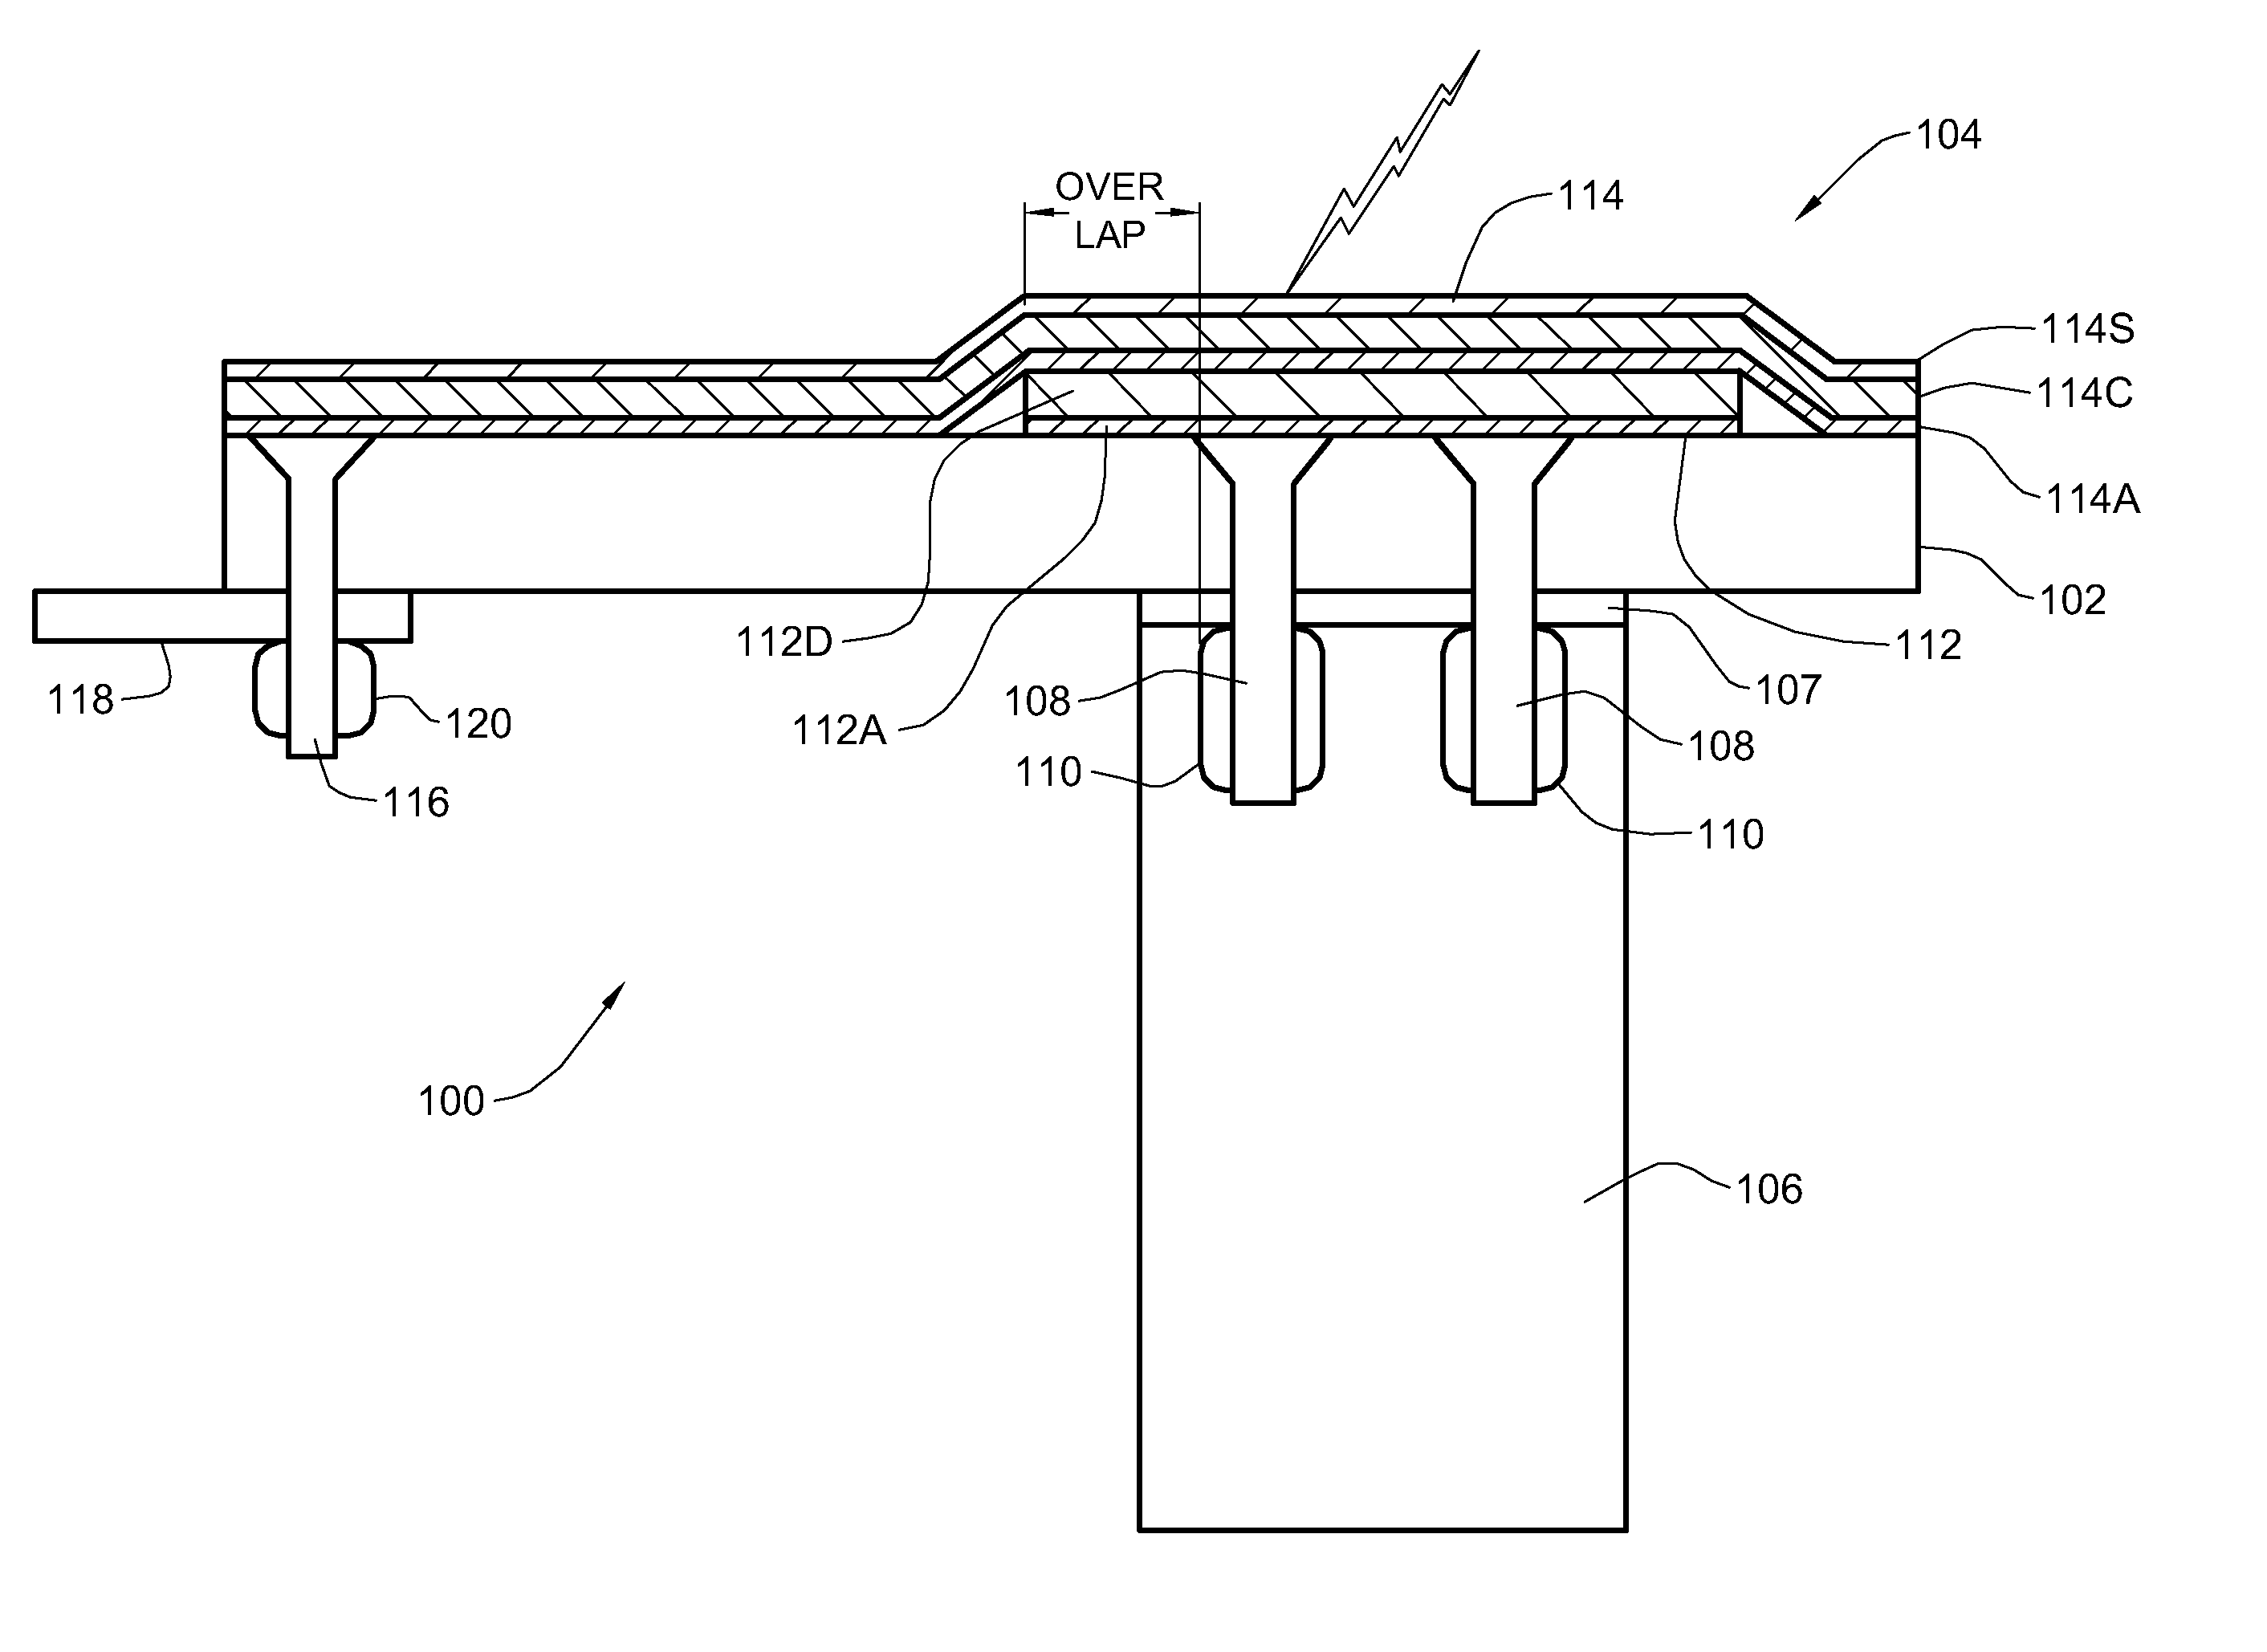 Lightning protection system for composite structure